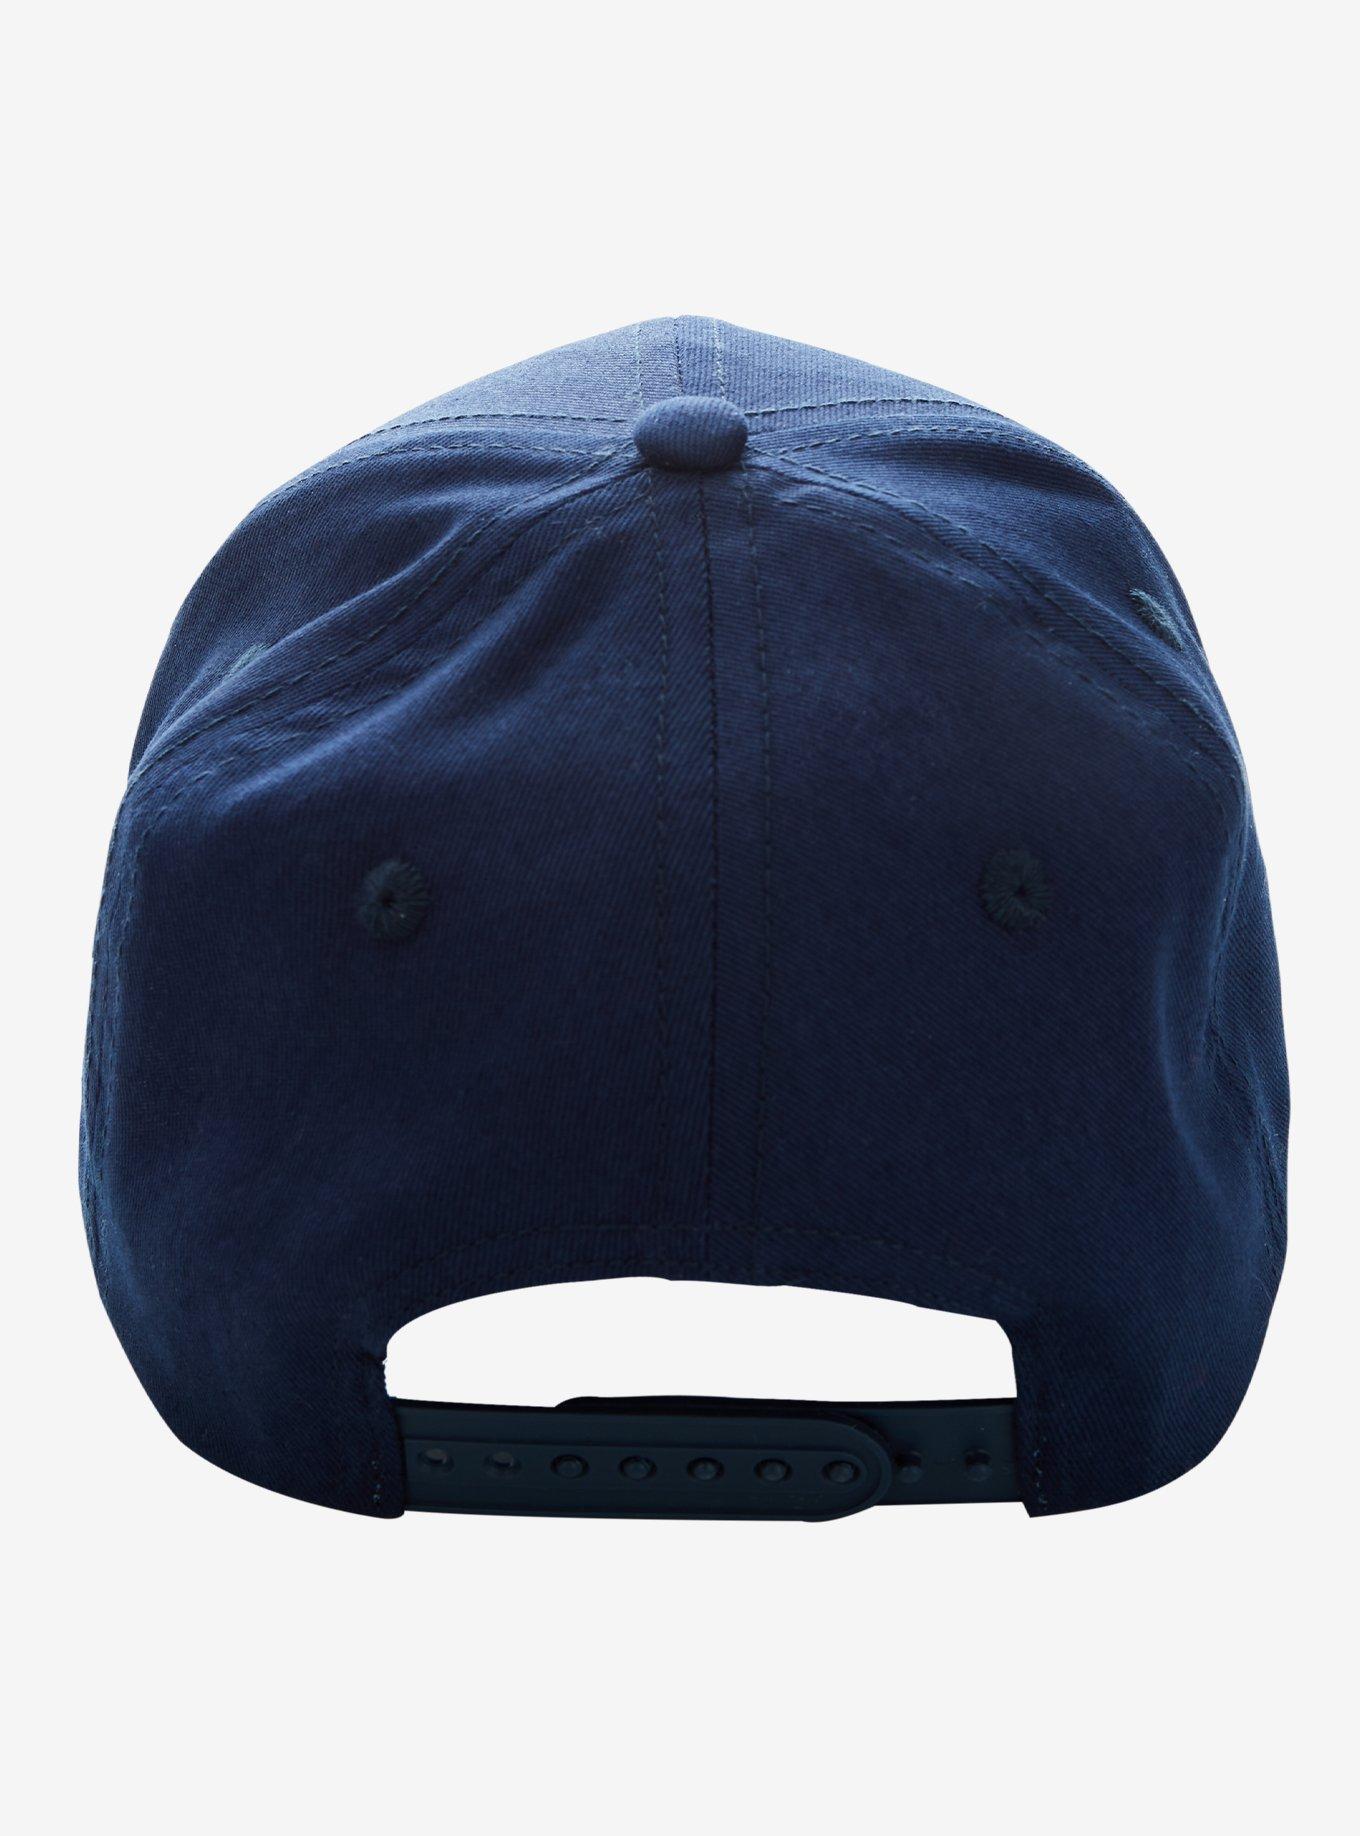 Bluey Dancing Bluey Youth Cap - BoxLunch Exclusive, , alternate